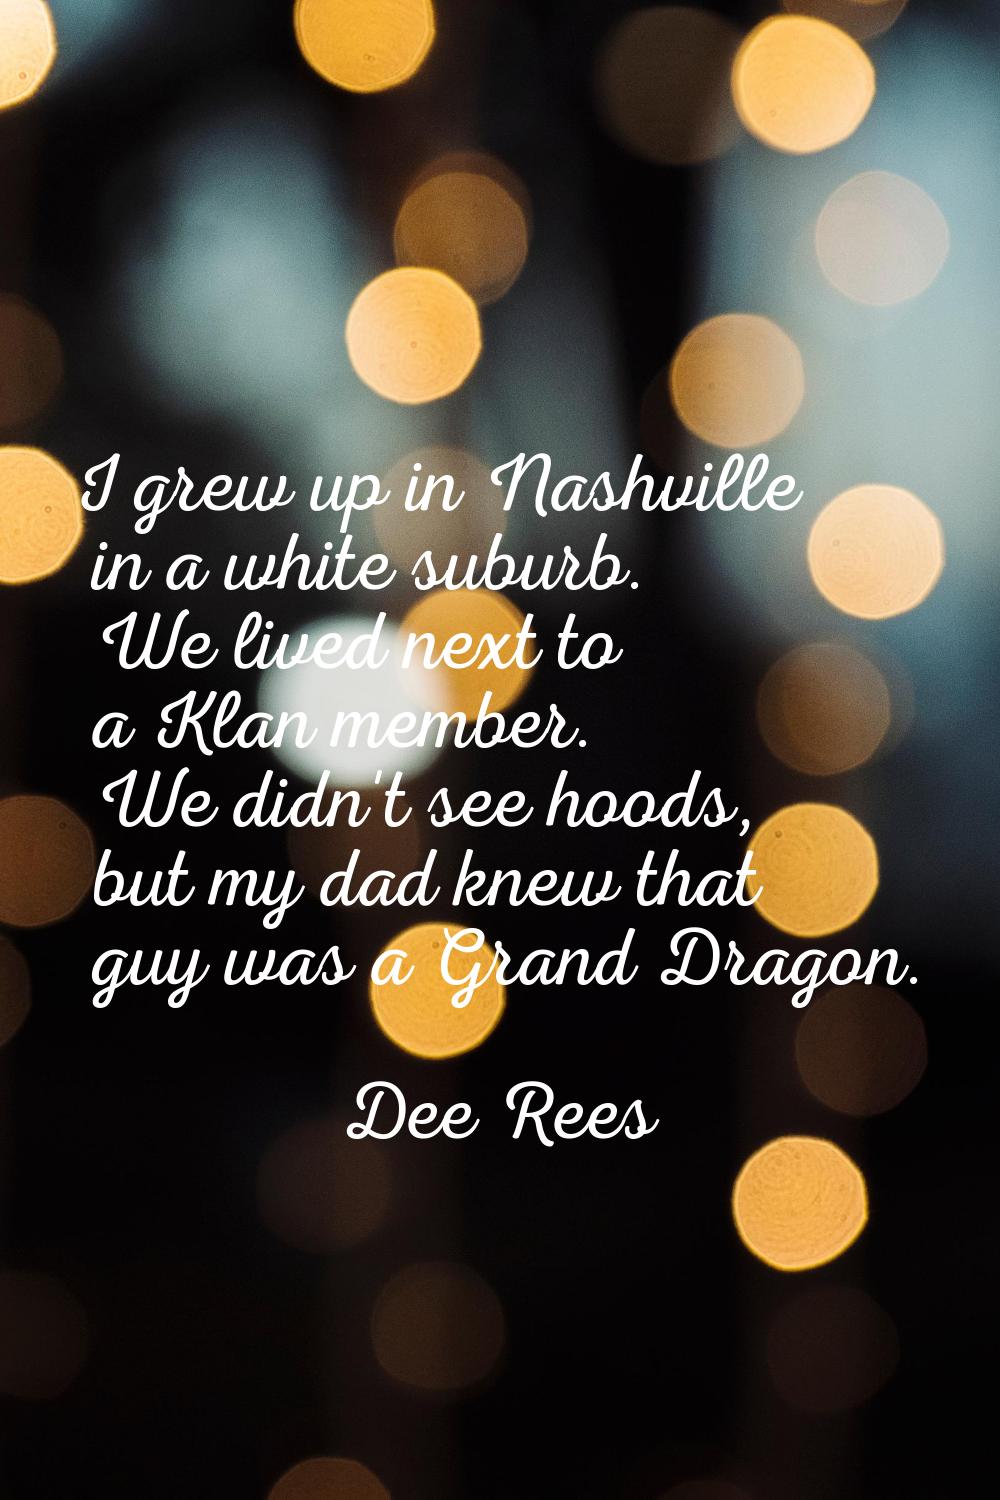 I grew up in Nashville in a white suburb. We lived next to a Klan member. We didn't see hoods, but 